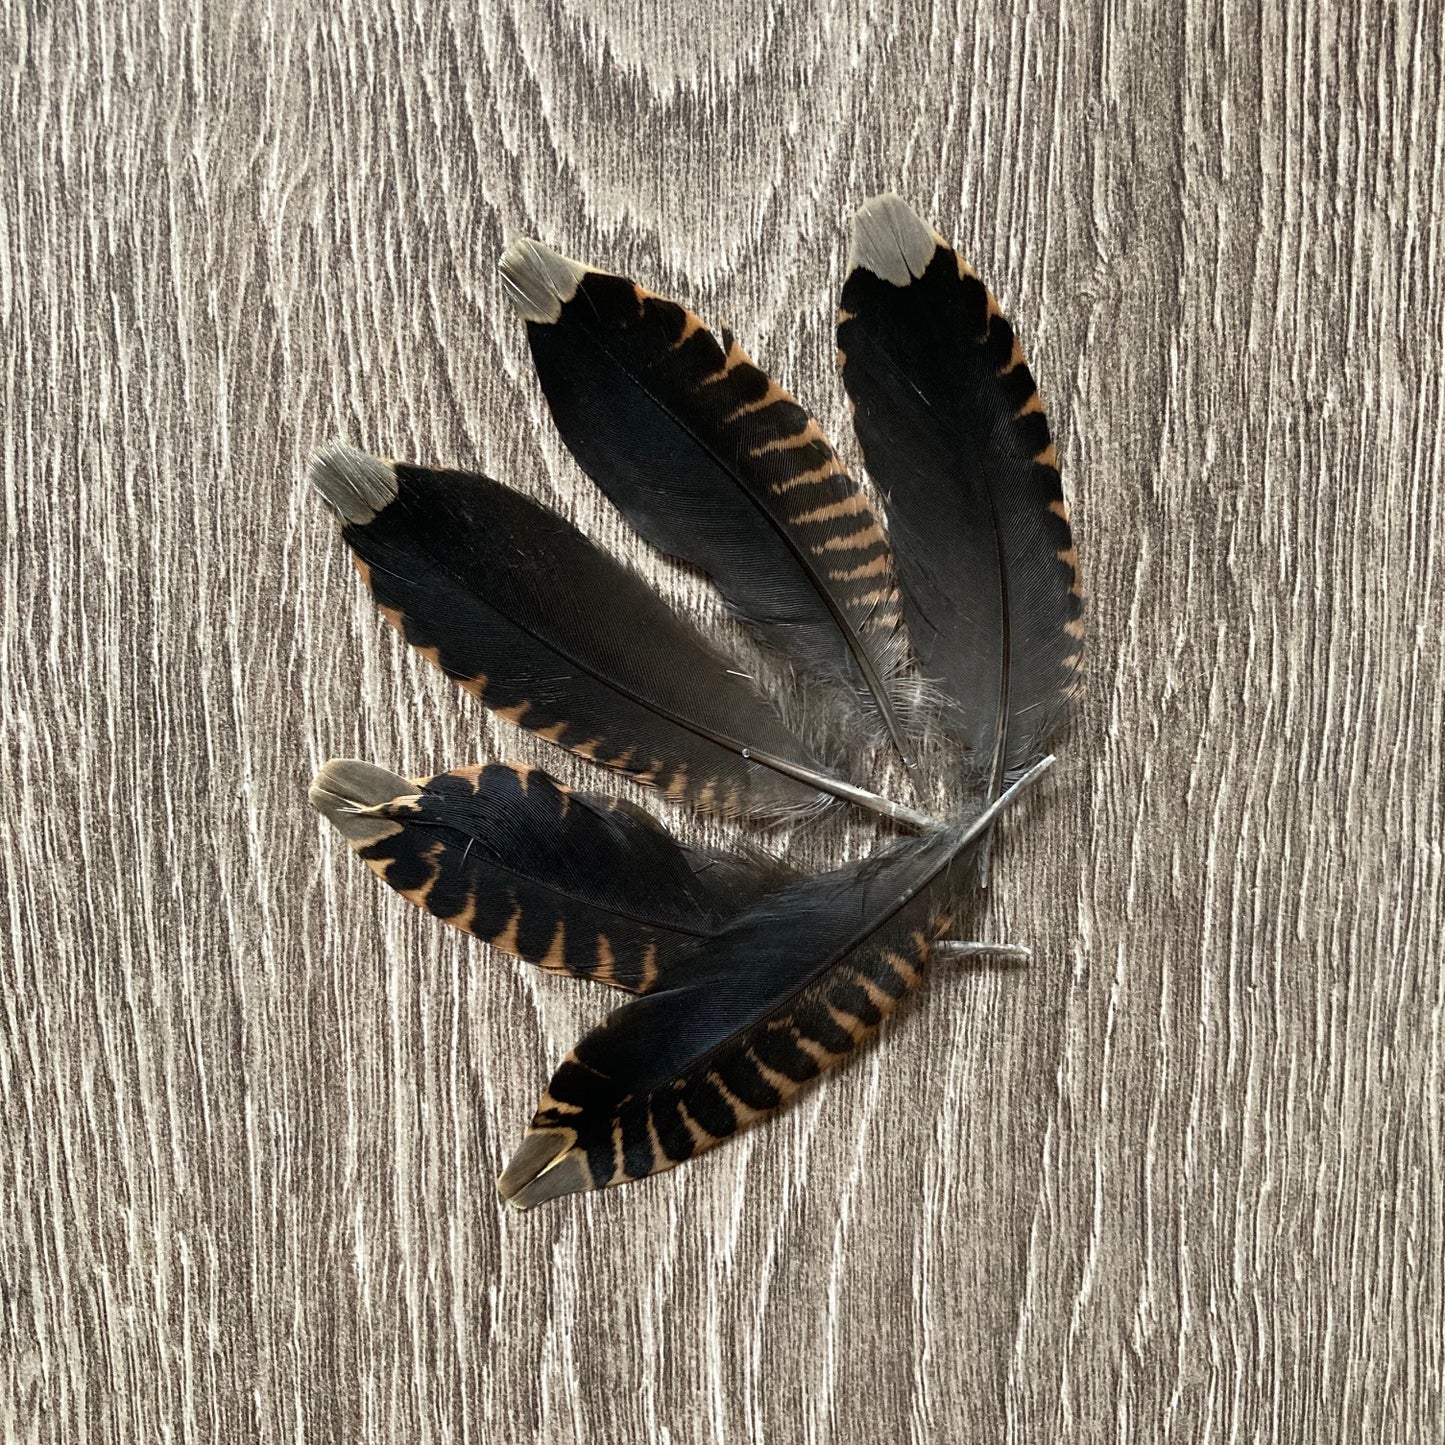 Woodcock Tail Feathers